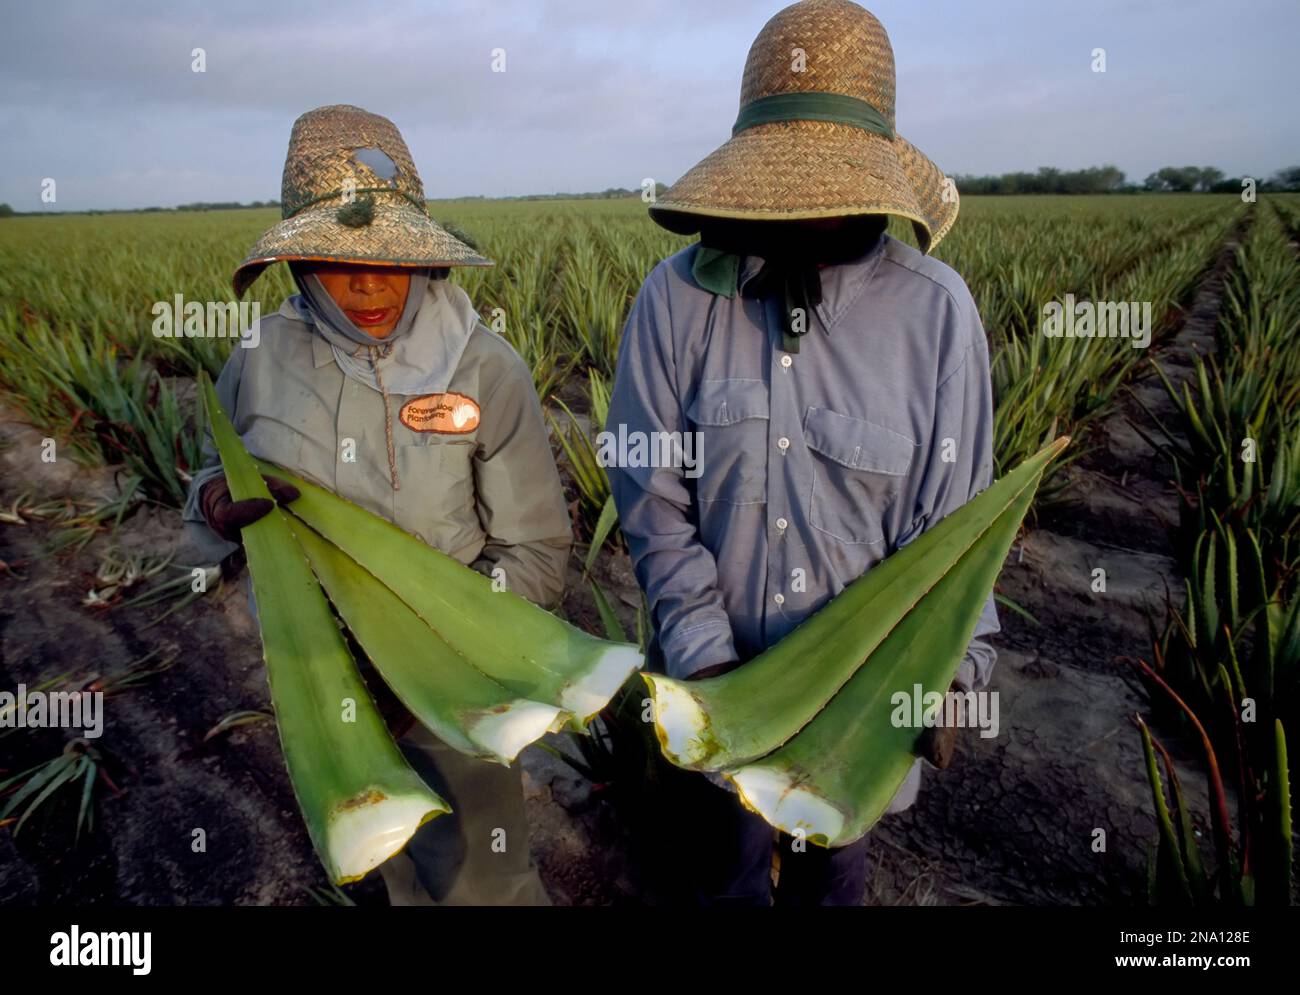 Two workers hold up some large outer leaves of aloe plants. The leaves will be processed into ointments, cosmetics, and beverages. Most of the farm... Stock Photo